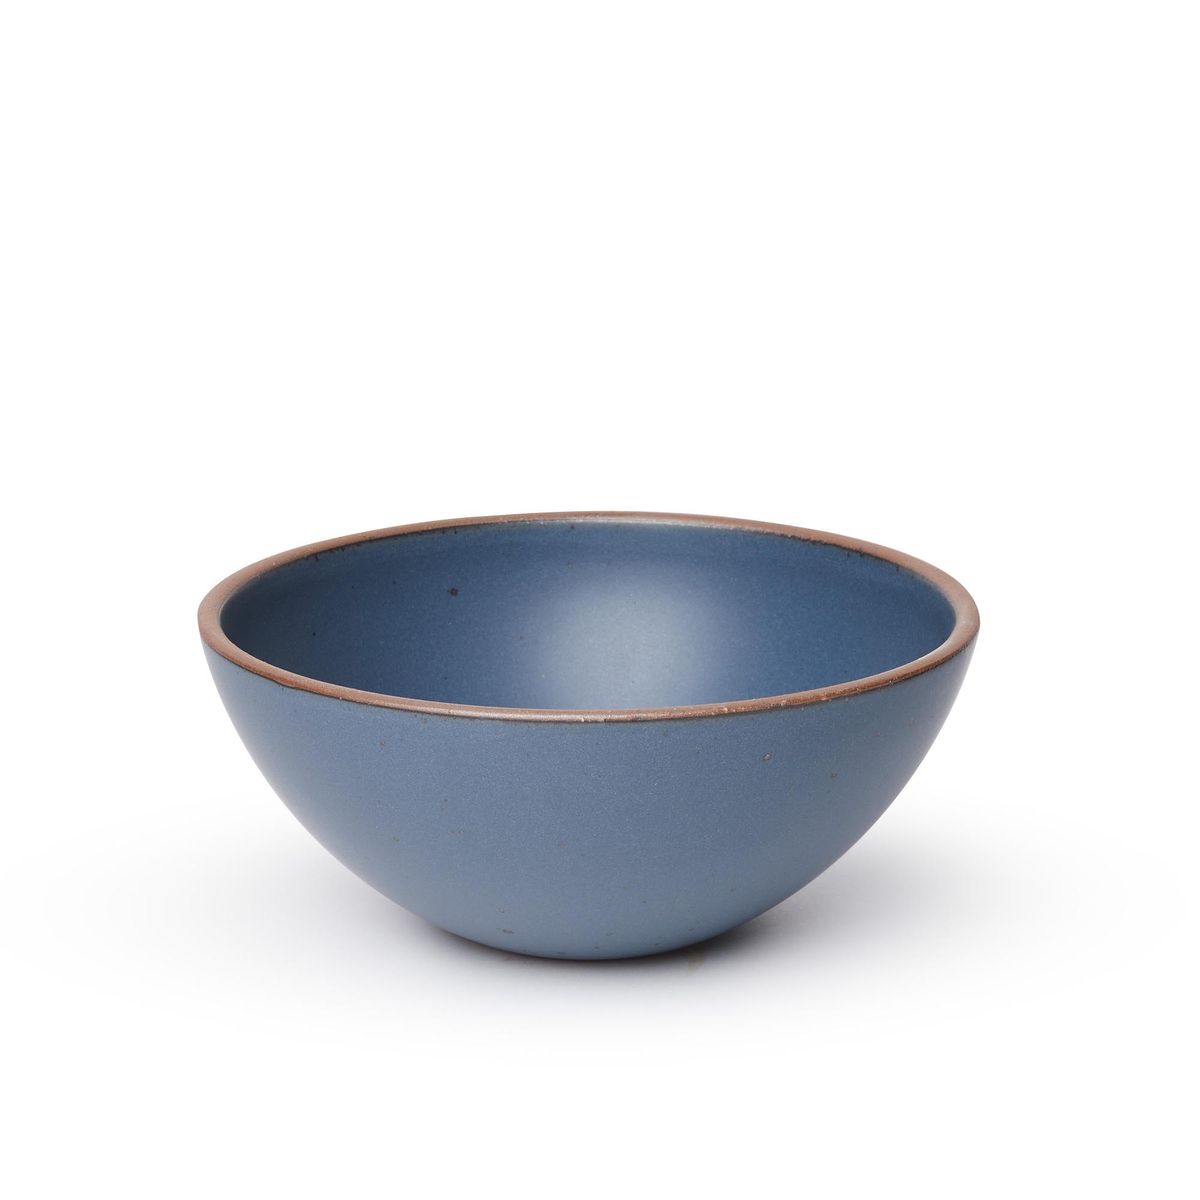 A large rounded ceramic bowl in a toned-down navy color featuring iron speckles and an unglazed rim